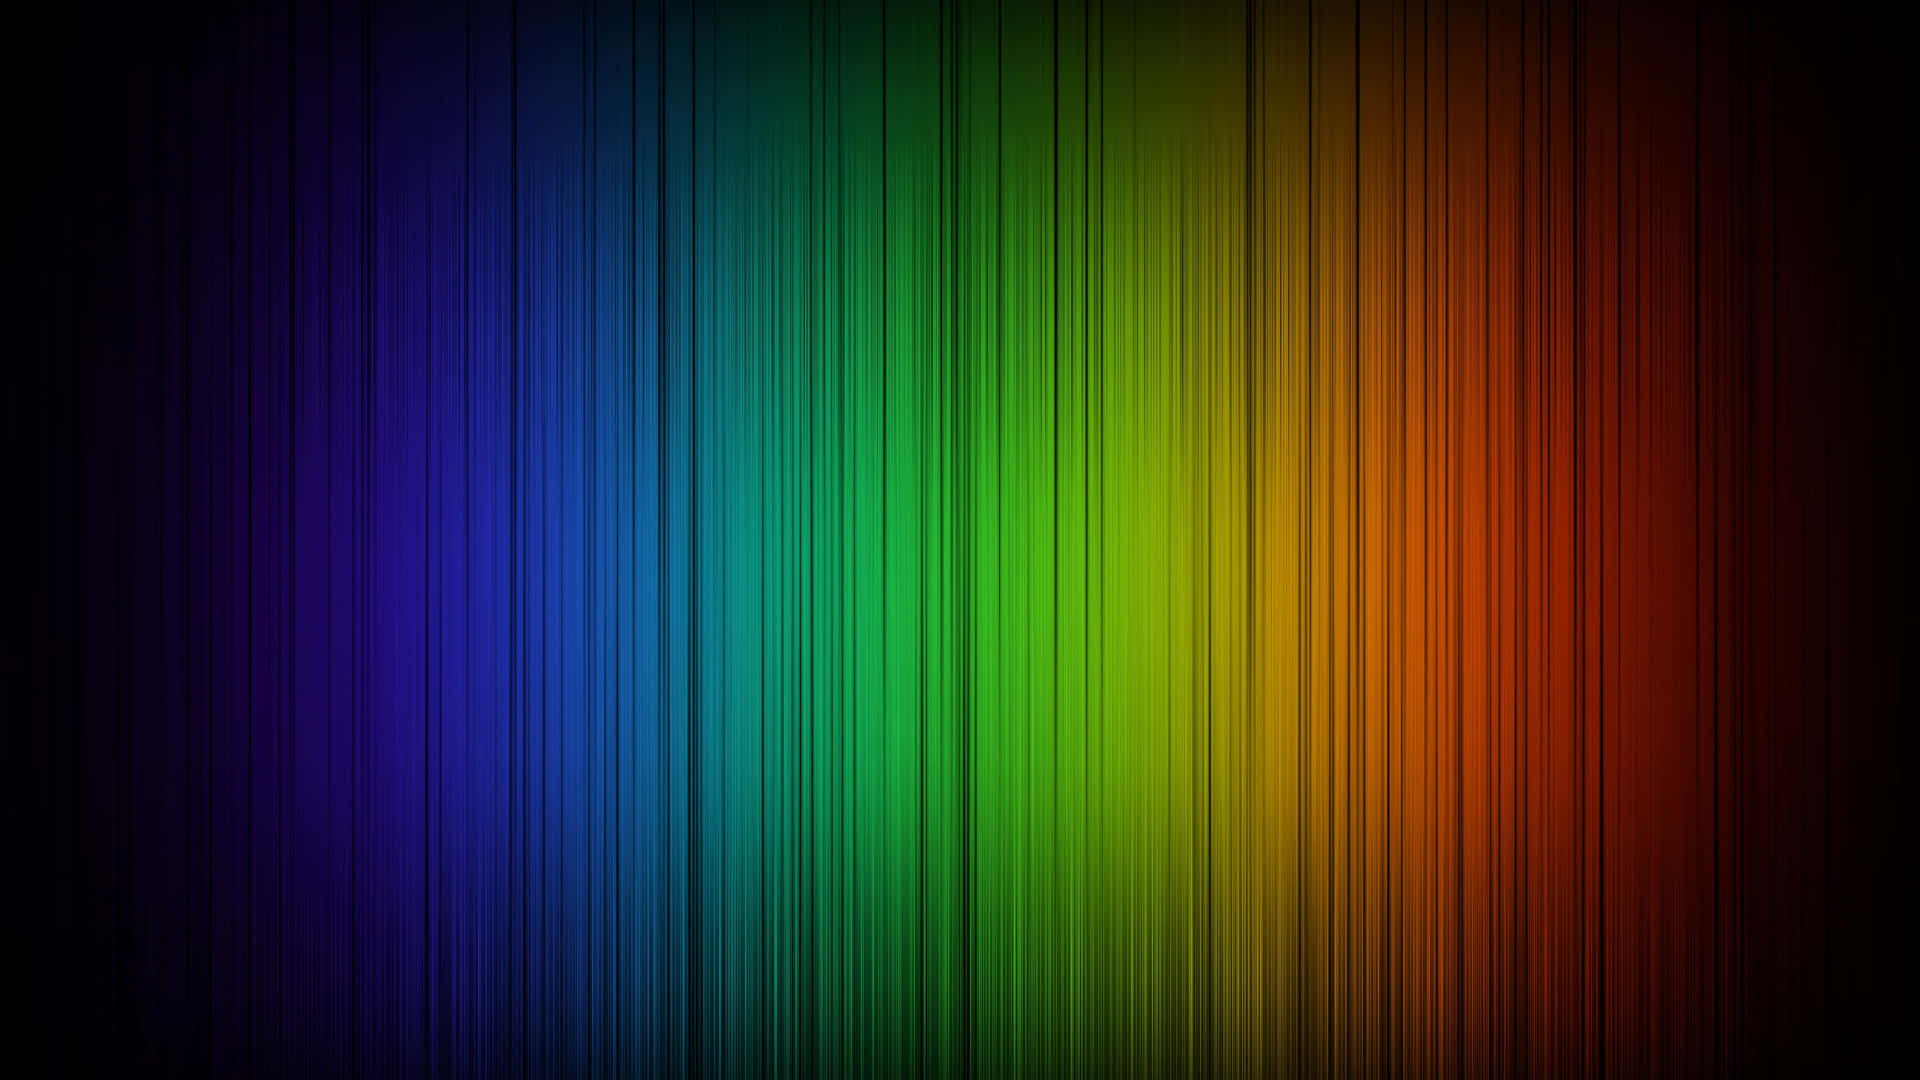 “Mystical Black Rainbow of Color and Beauty” Wallpaper